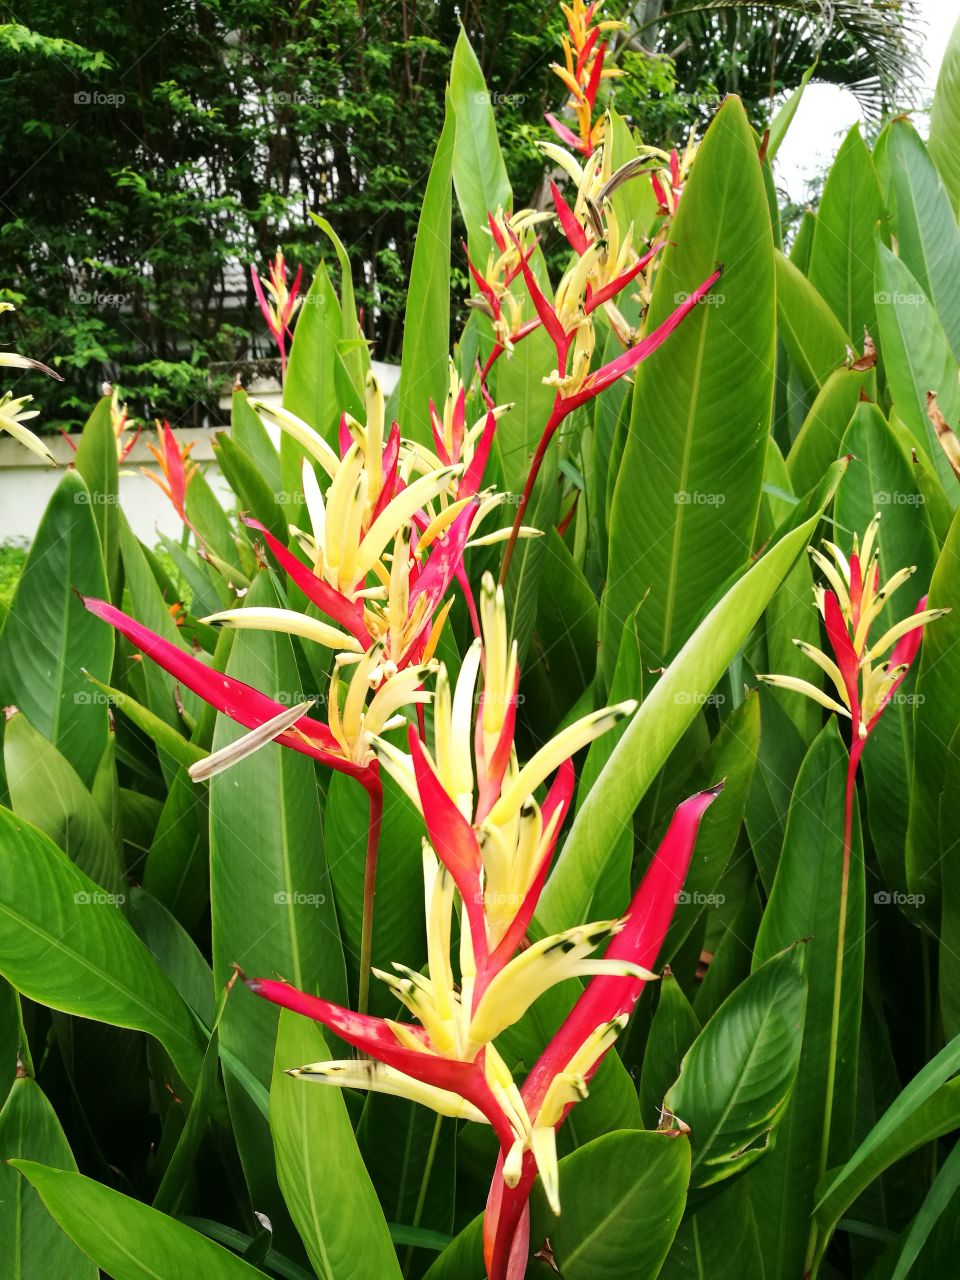 Heliconia flowers with red and yellow color bloom in garden.